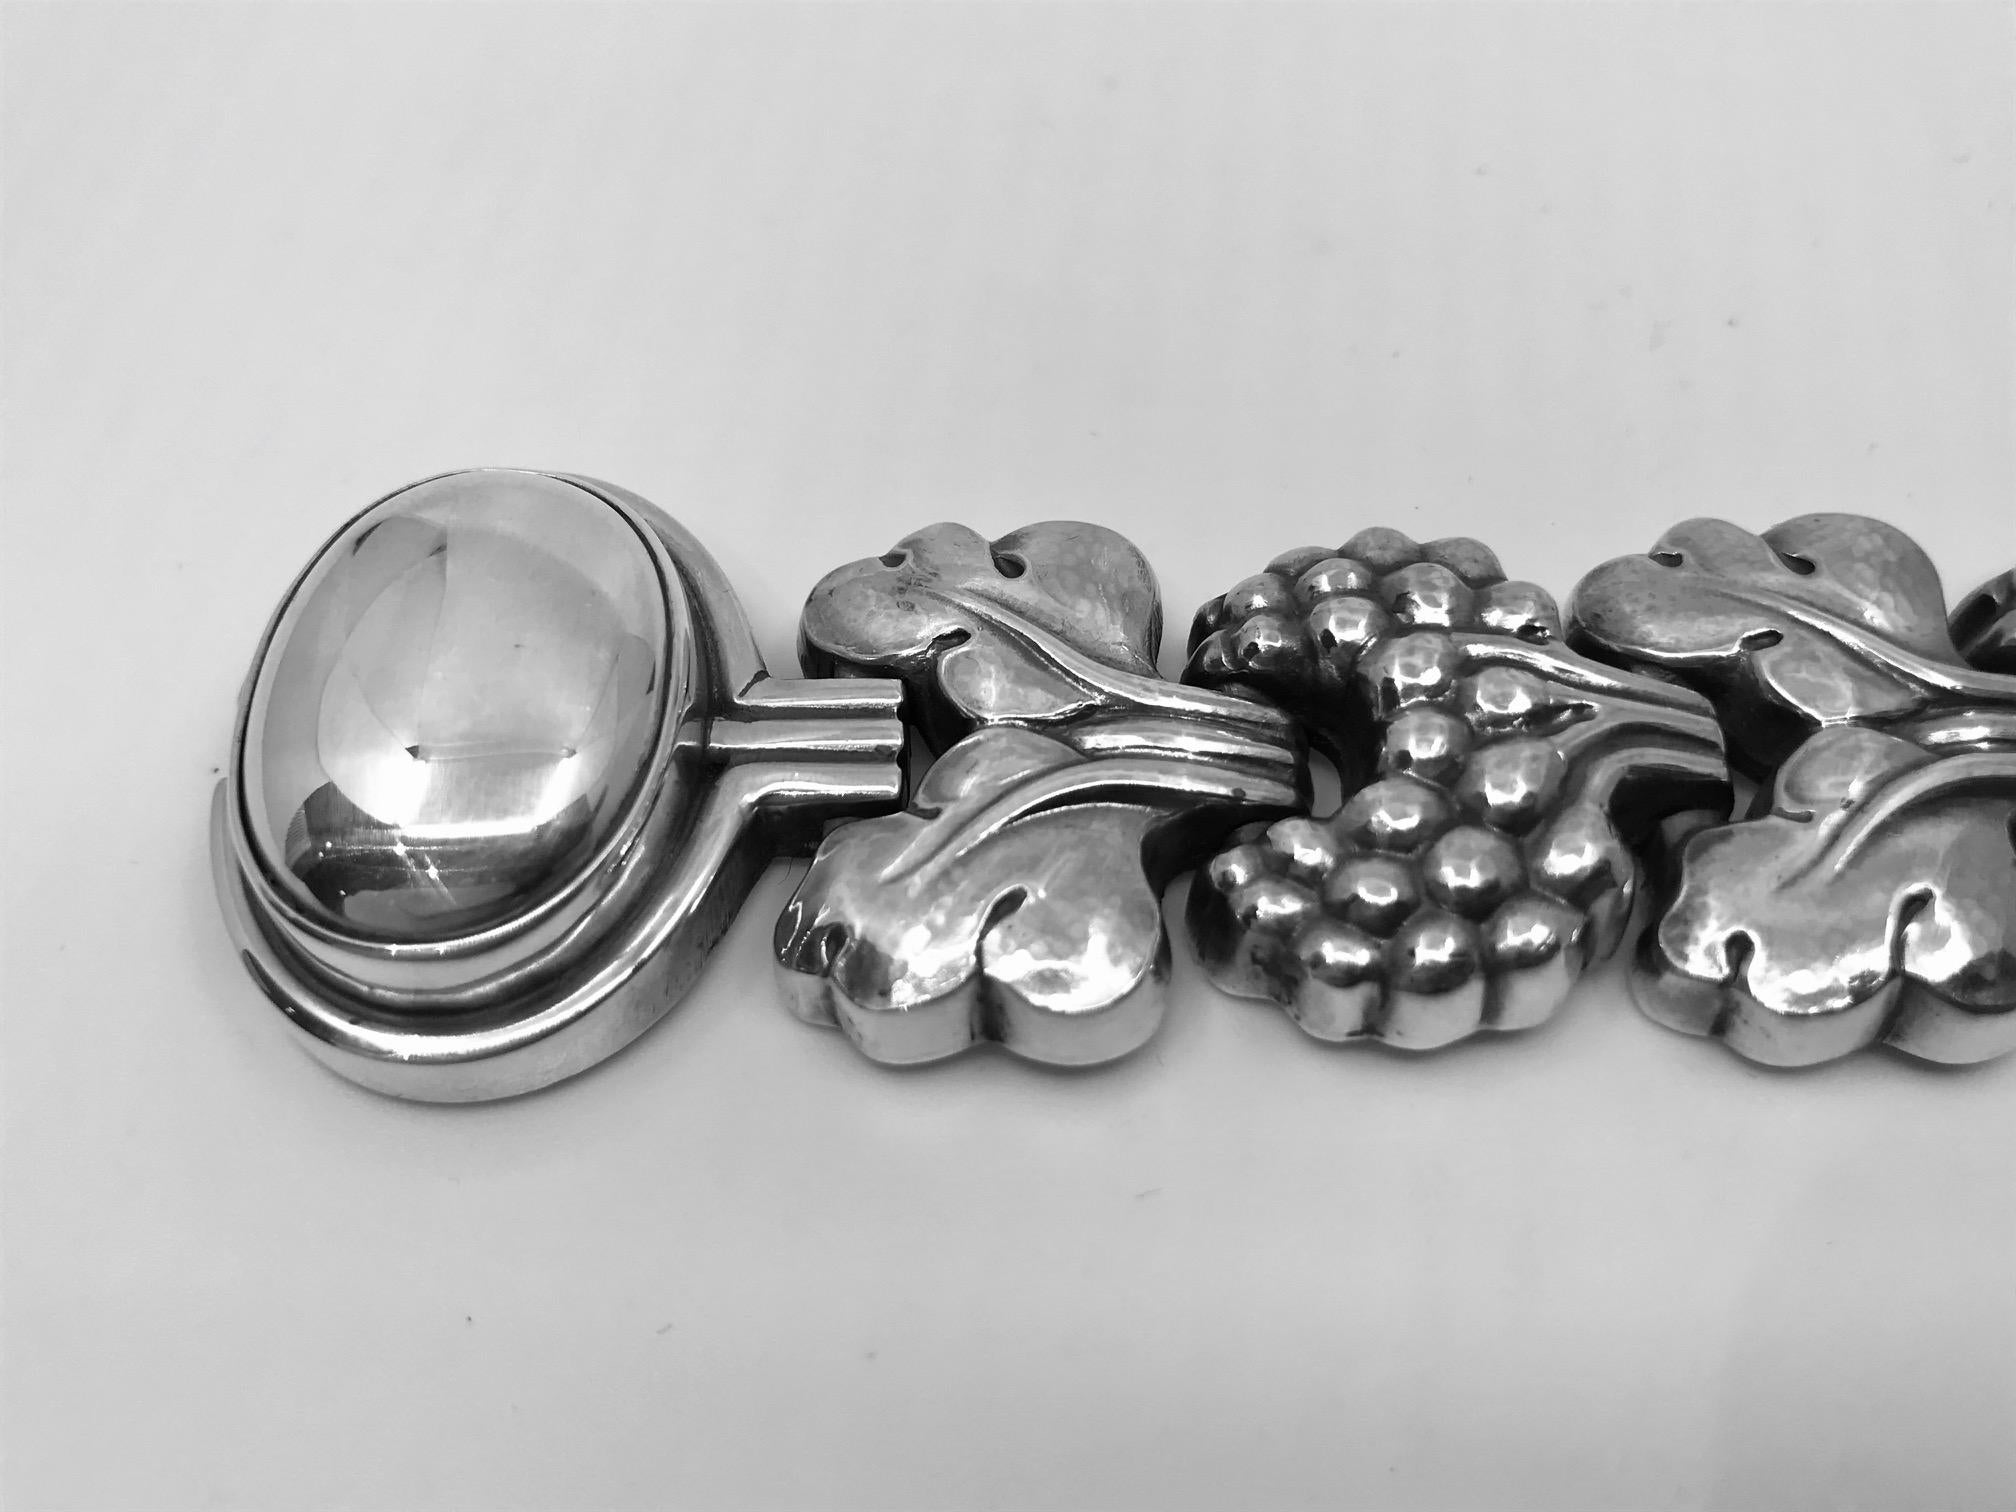 Sterling silver Georg Jensen bracelet with stylized berries and leaves and a large oval cabochon set silver bead on the lock, design #30 by Georg Jensen. This piece was designed during a brief period when Georg Jensen moved to Paris,